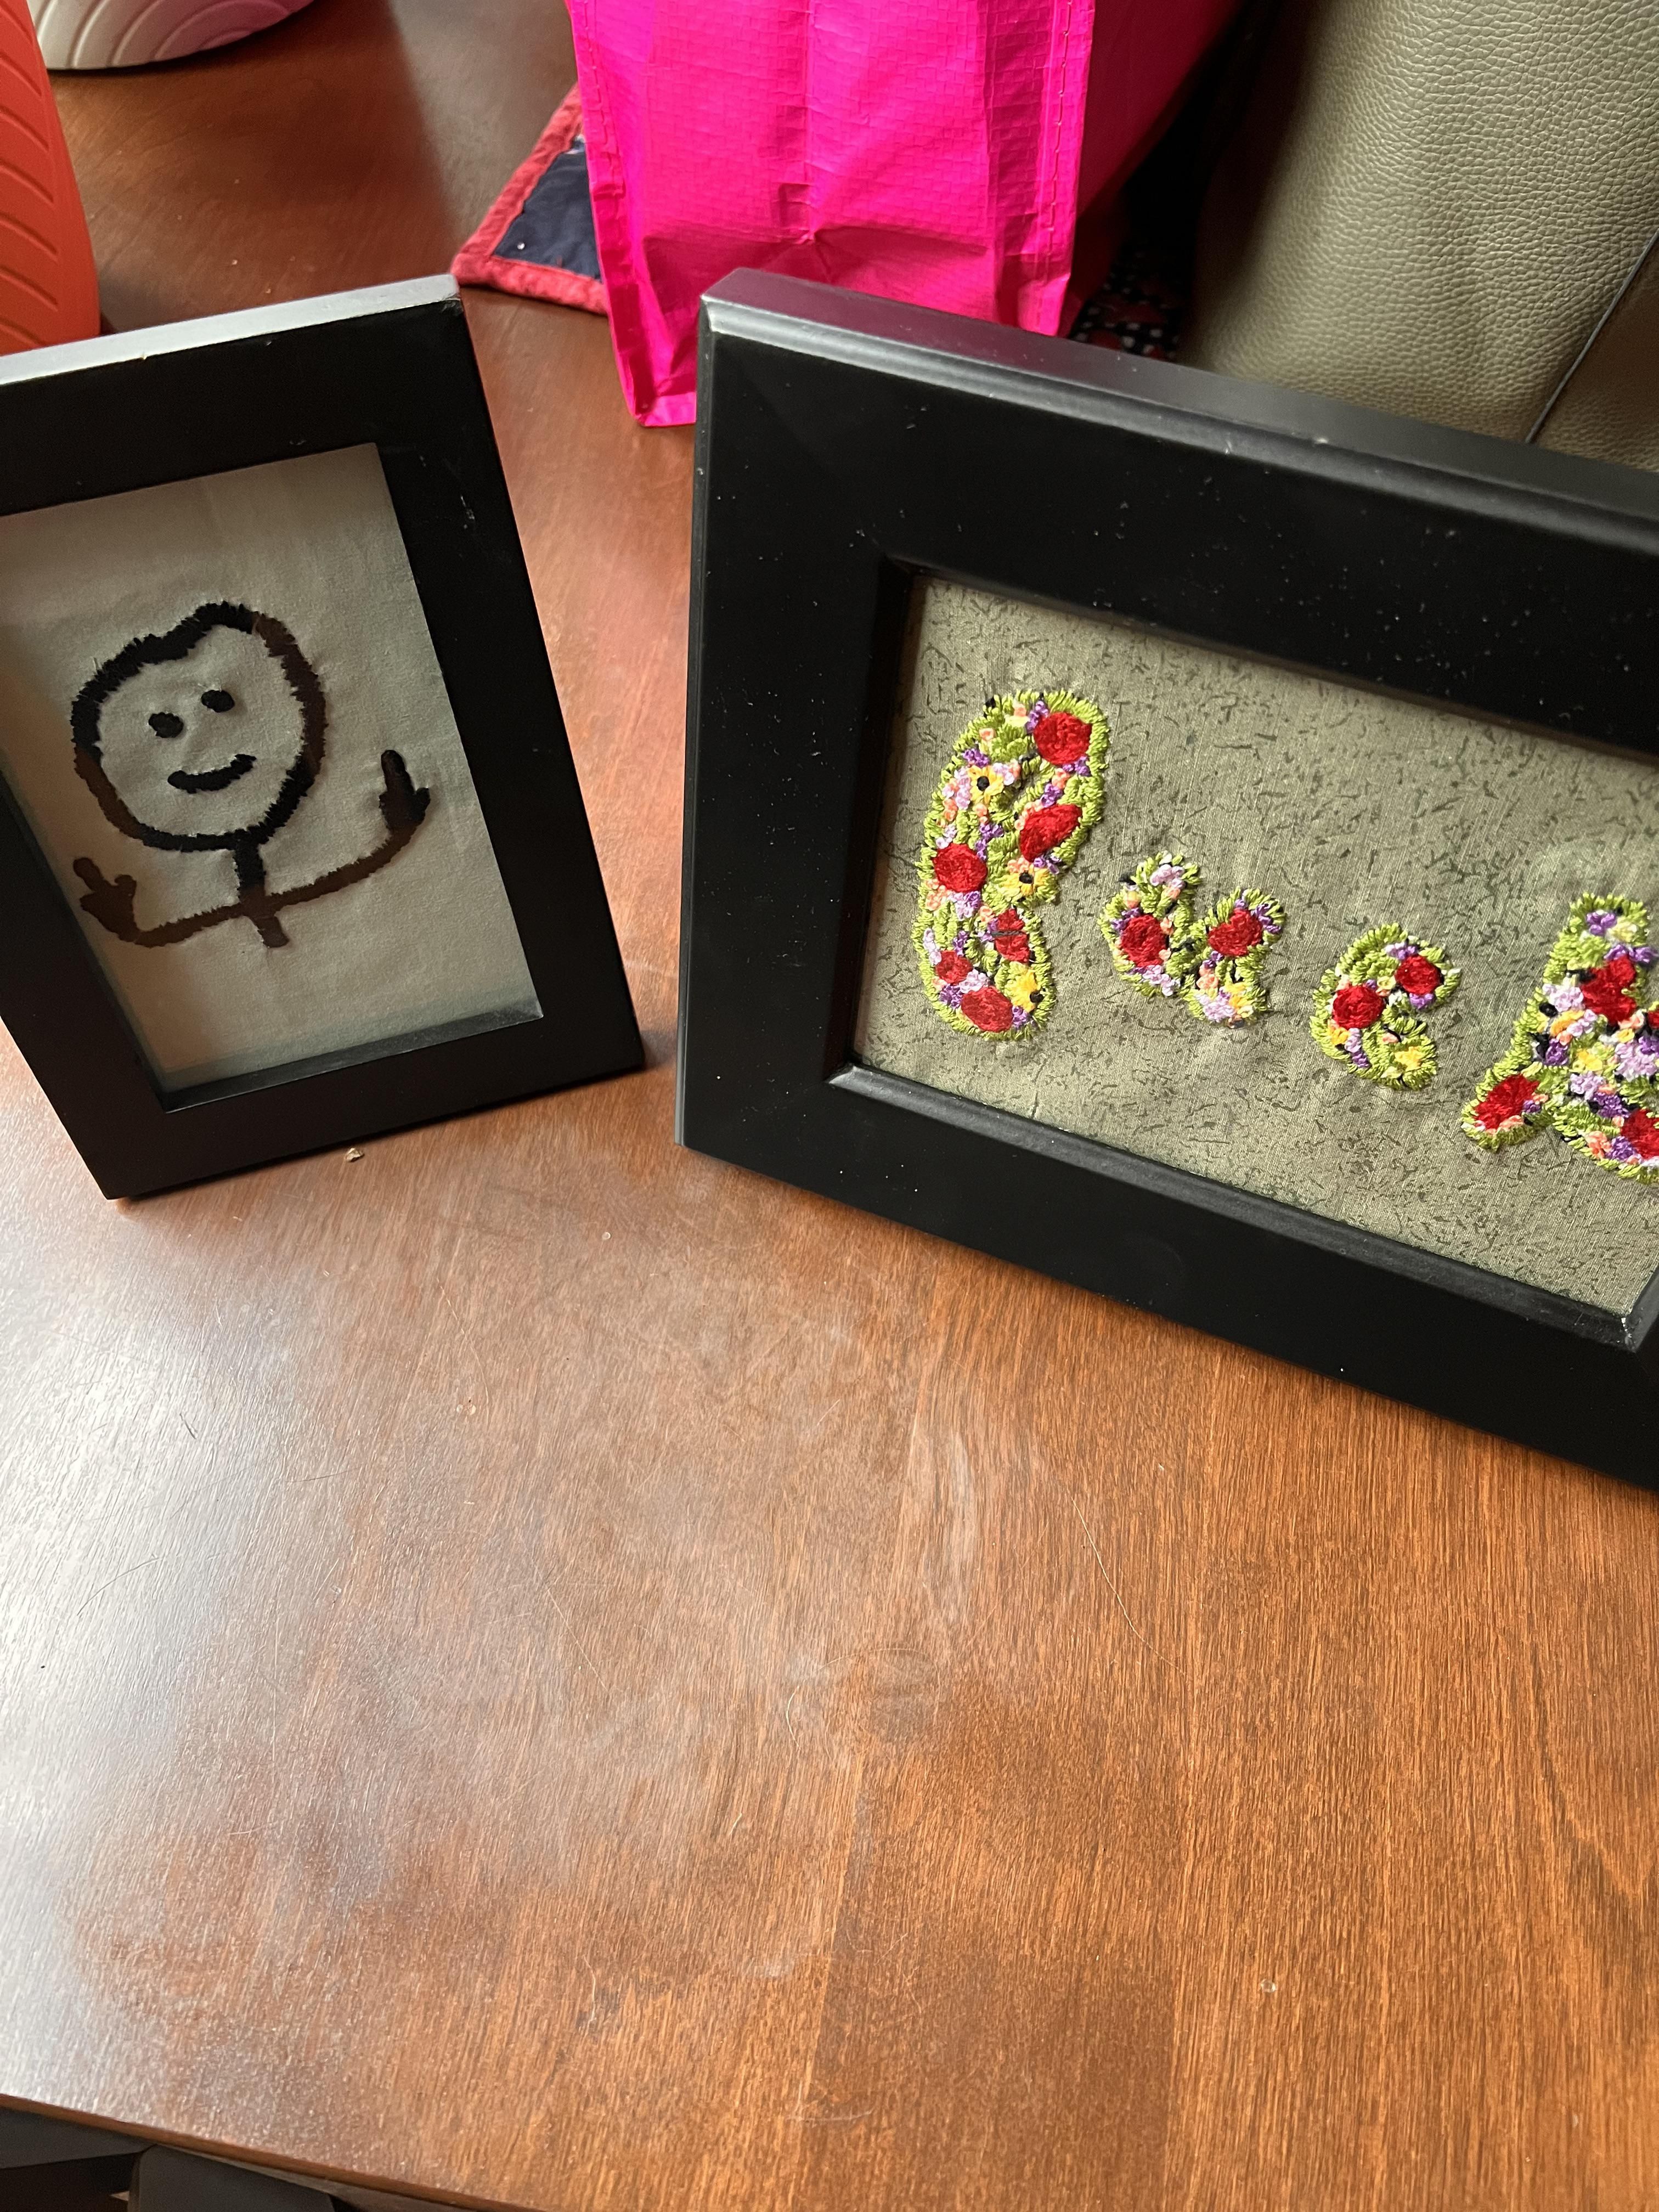 I met a super nice retired lady last week who told me she loves to embroider on her free time. I asked for some art work and she delivered these to me today.